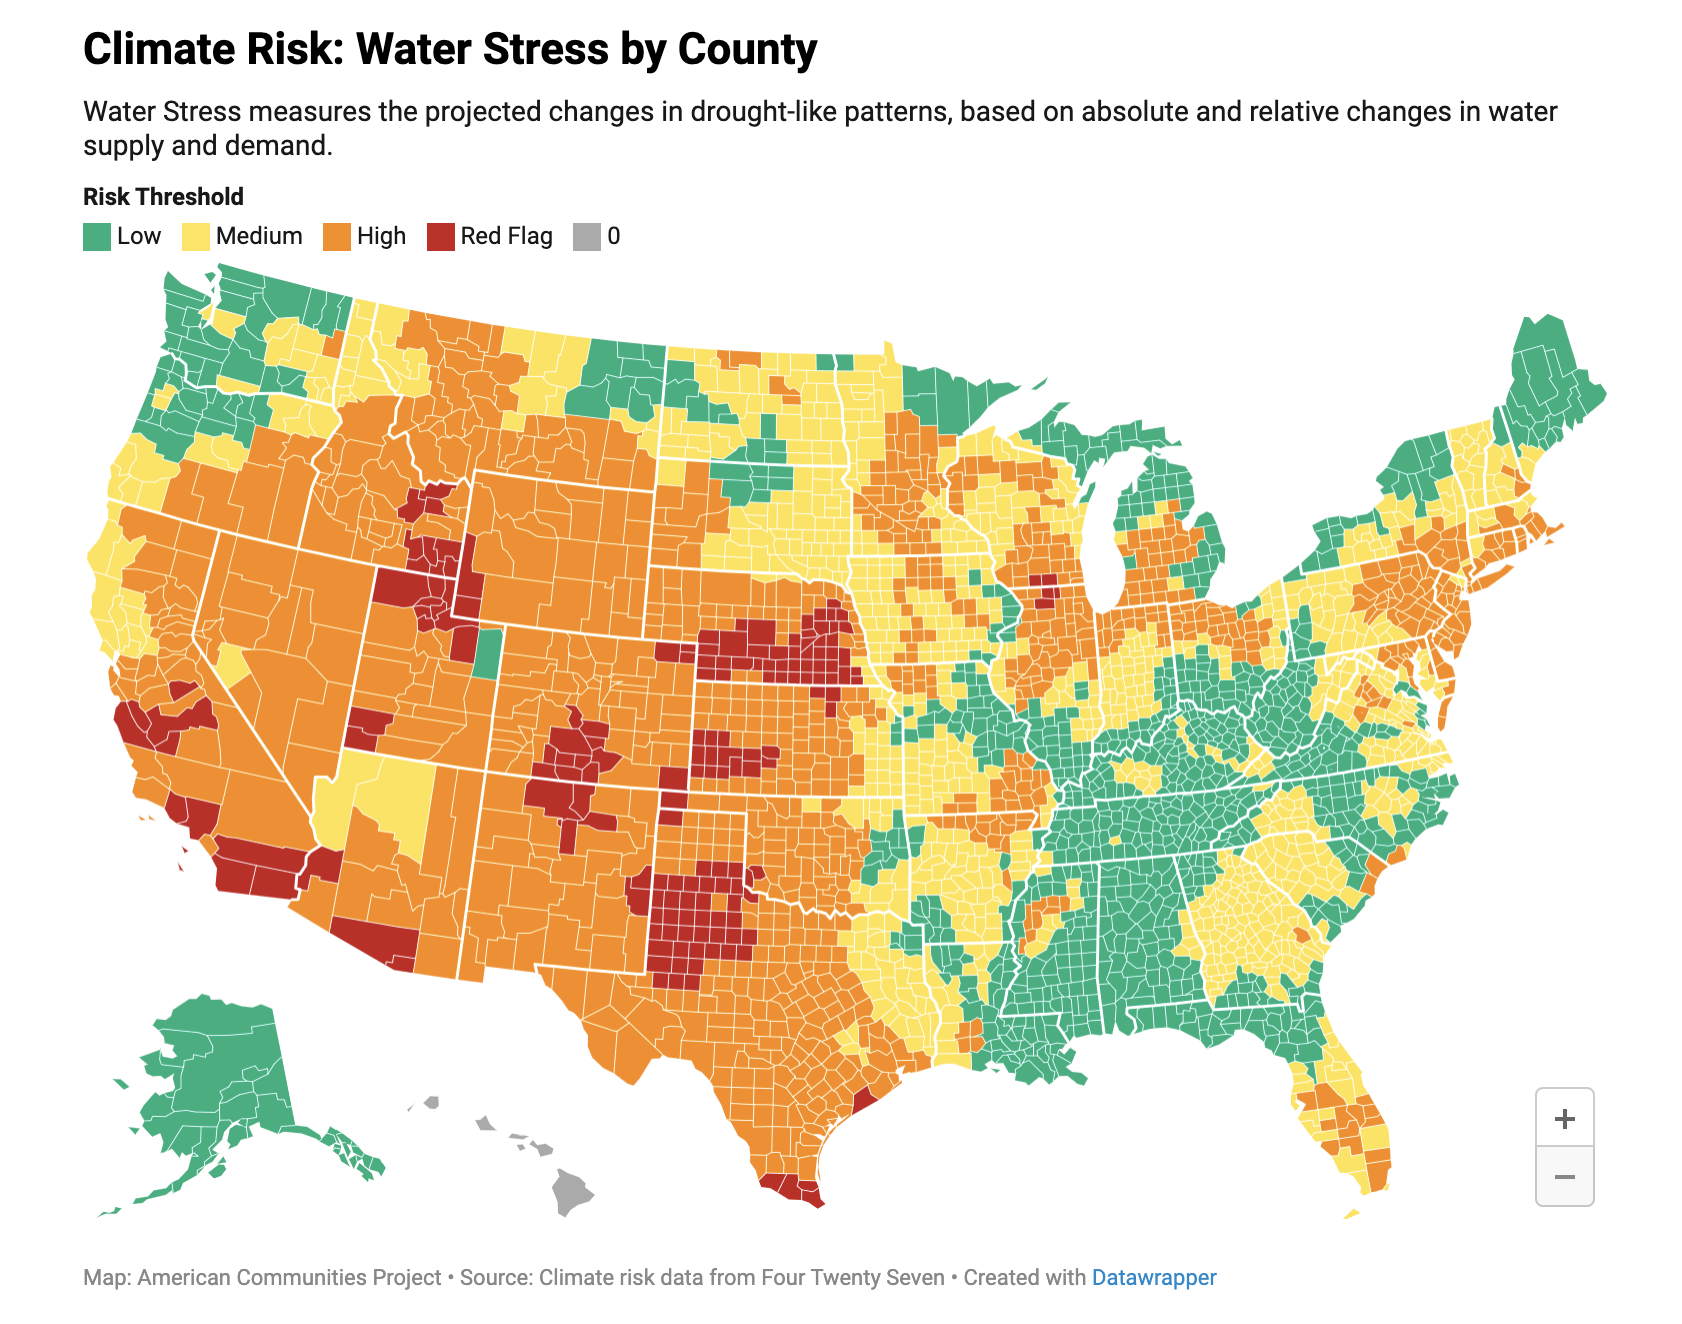 Figure 1.7 - Mapping Climate Risks by County and Community (Source: Pinkus 2021, via the American Communities Project)